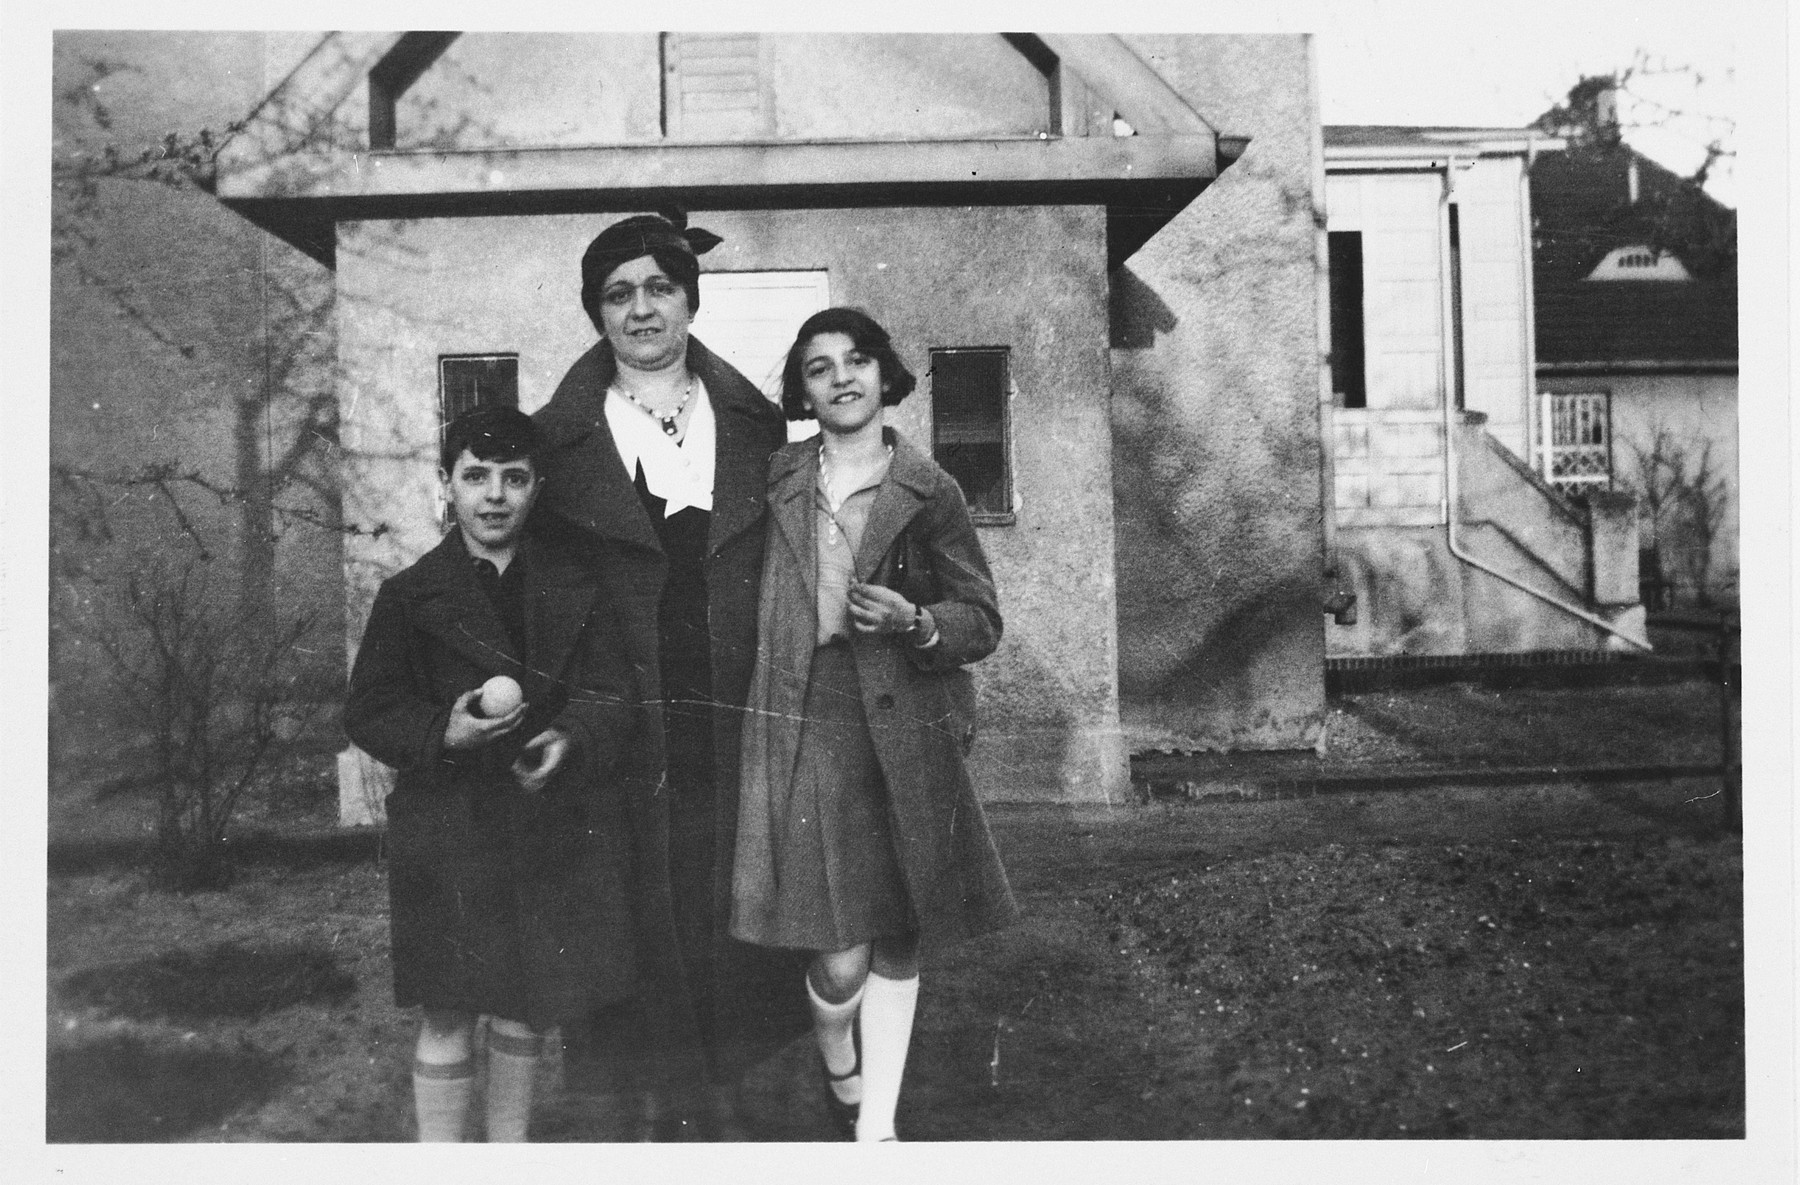 A Jewish mother and her two children pose outside an old age home in Germany.

Pictured from left to right are: Heinz, Ella and Alice Redlich.